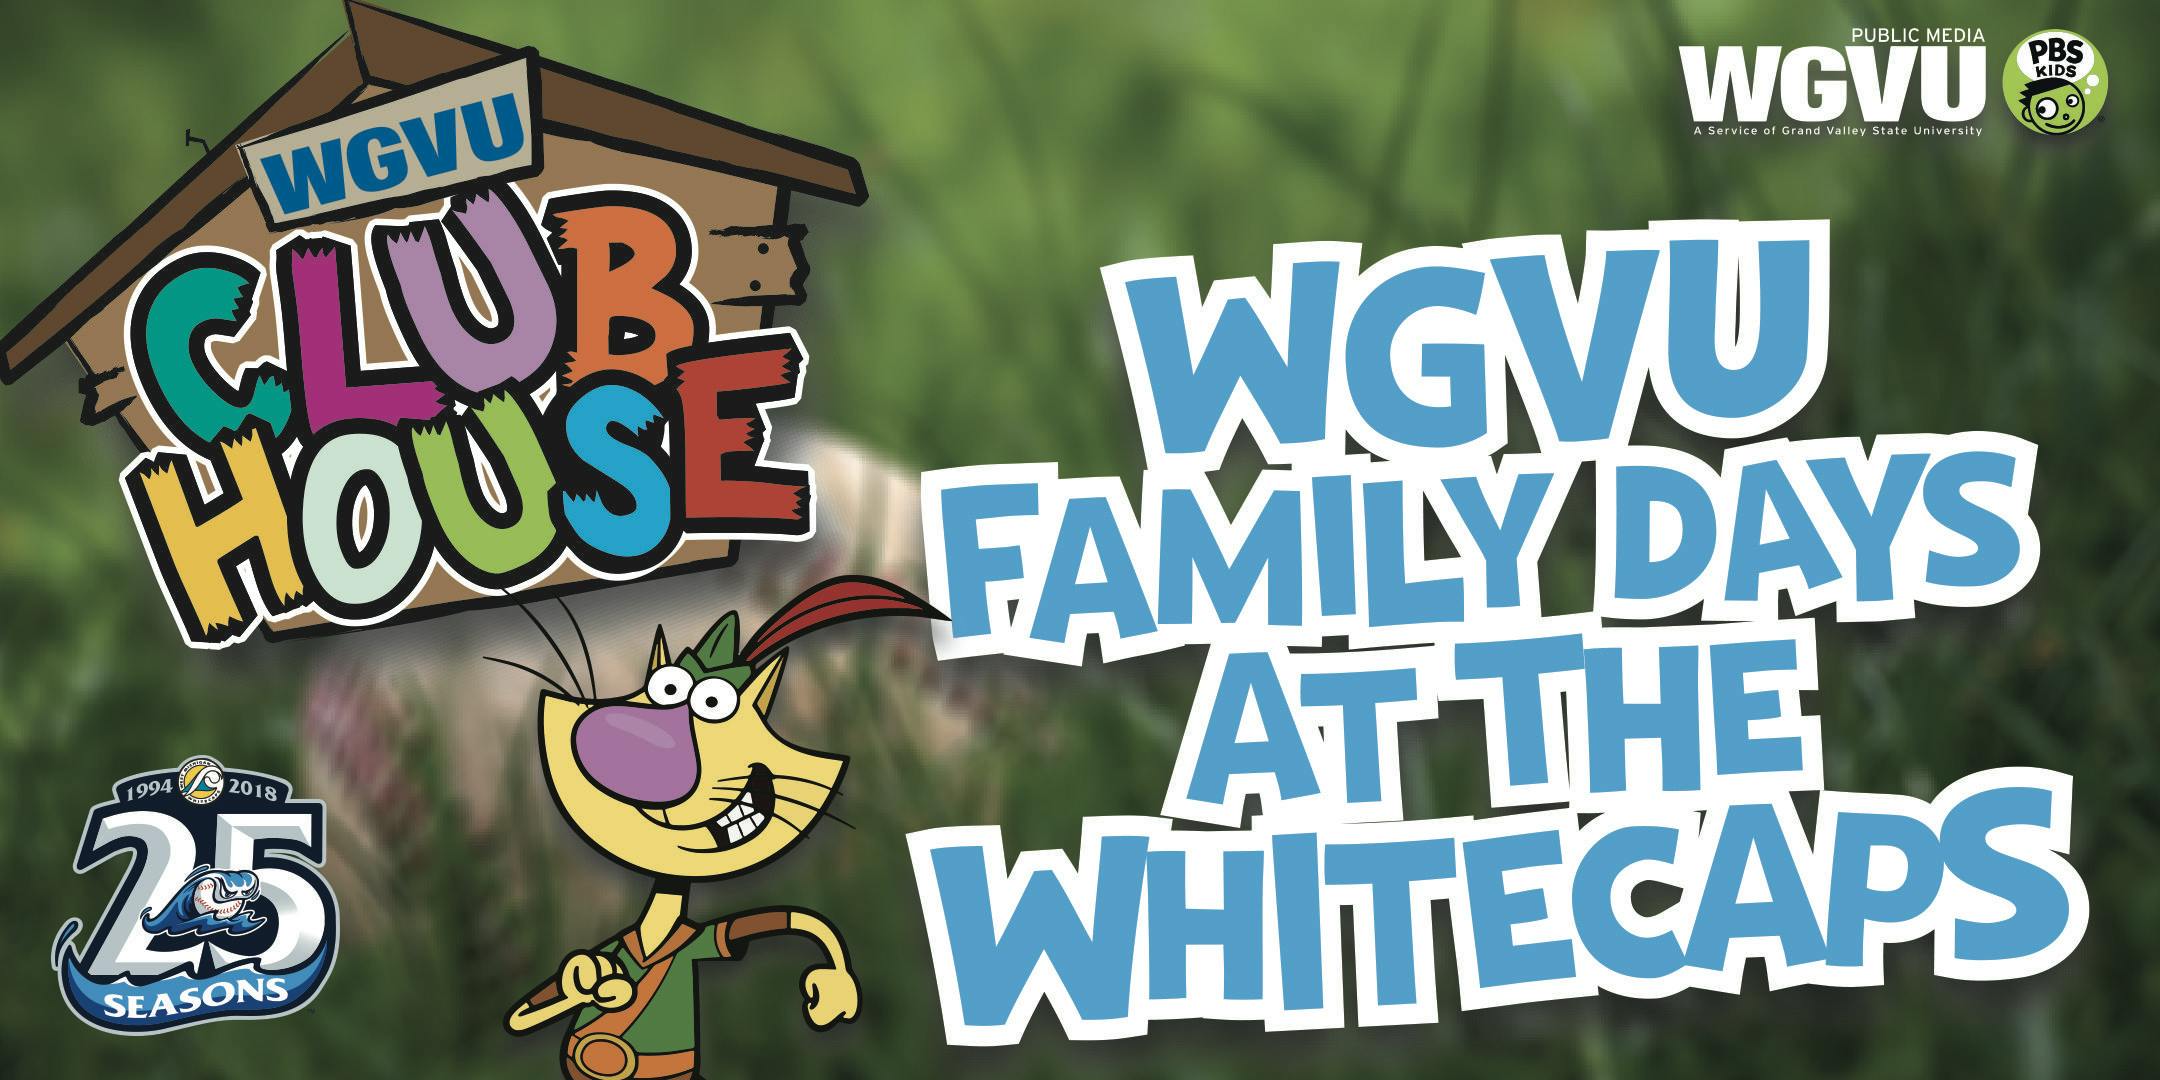 WGVU Clubhouse and the West Michigan Whitecaps present Family Days at 5/3 Ballpark!